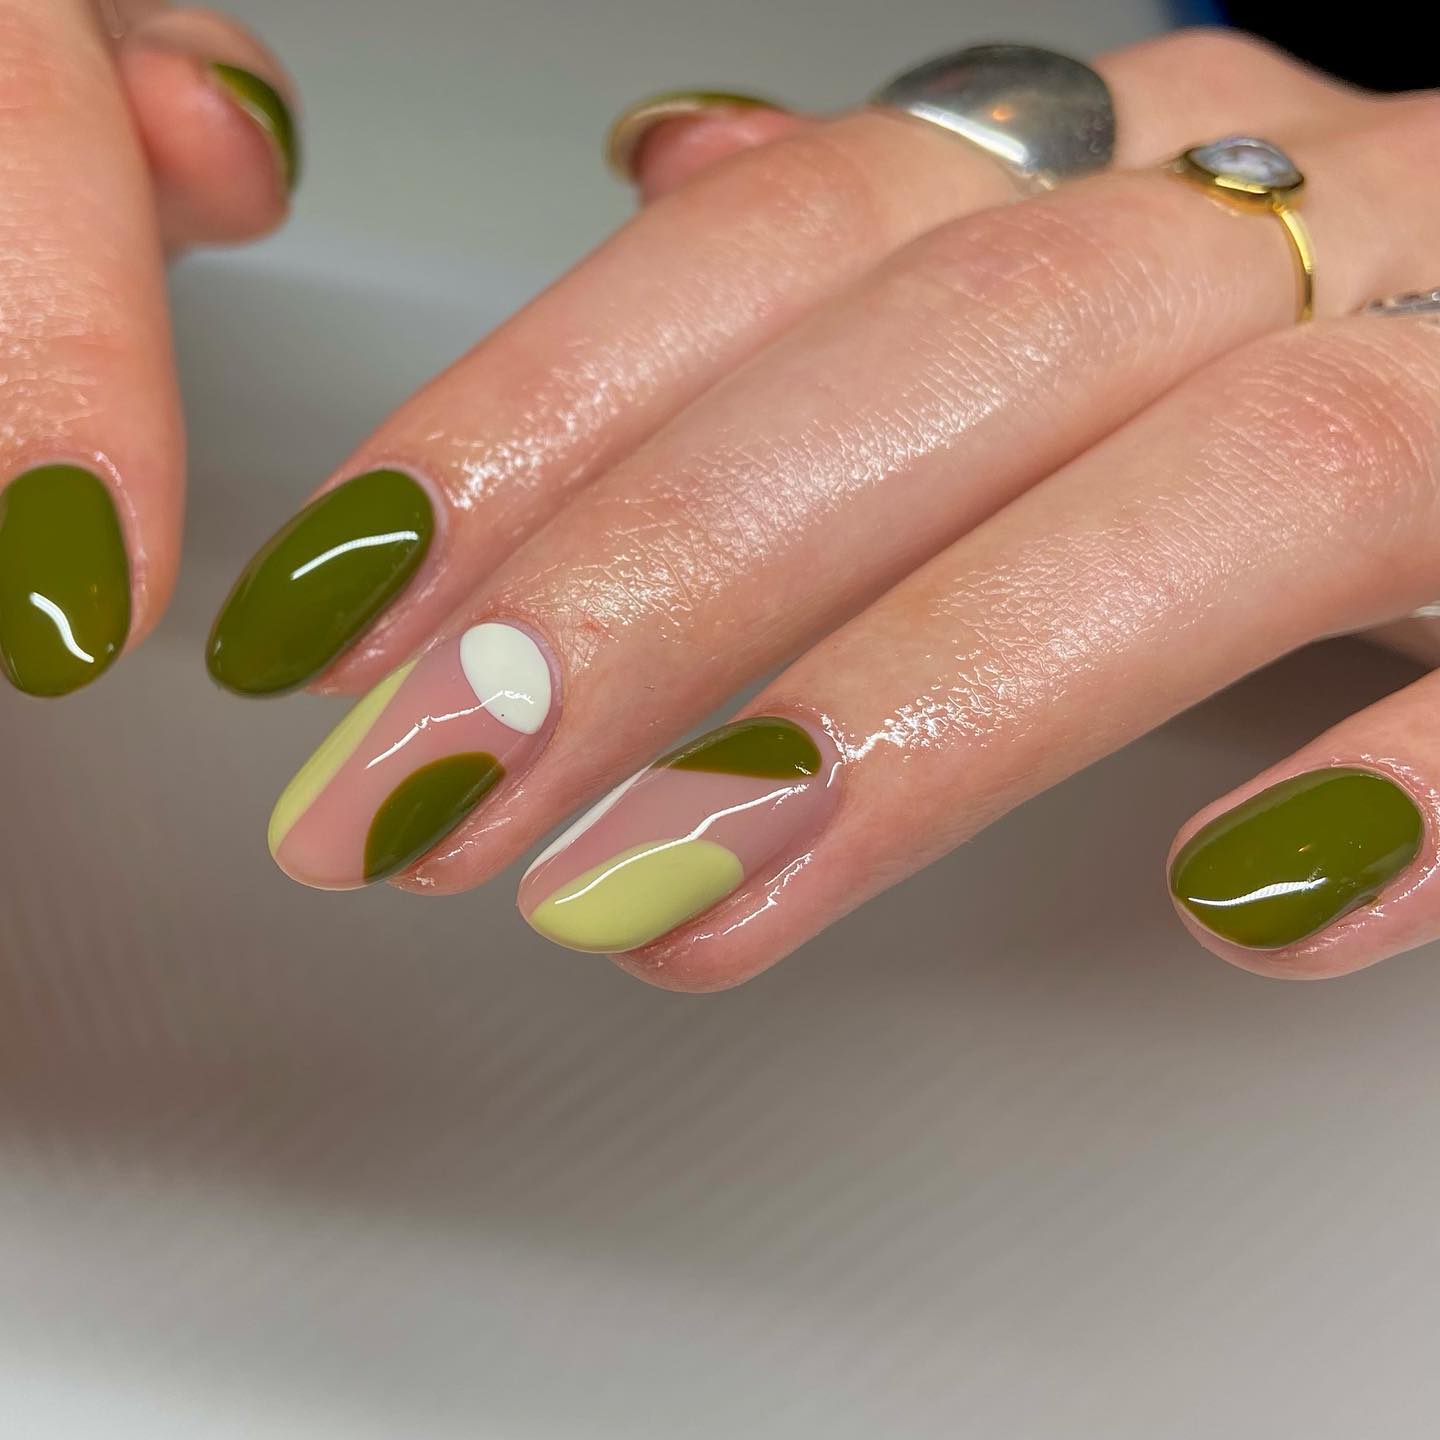 Green nails with different shades